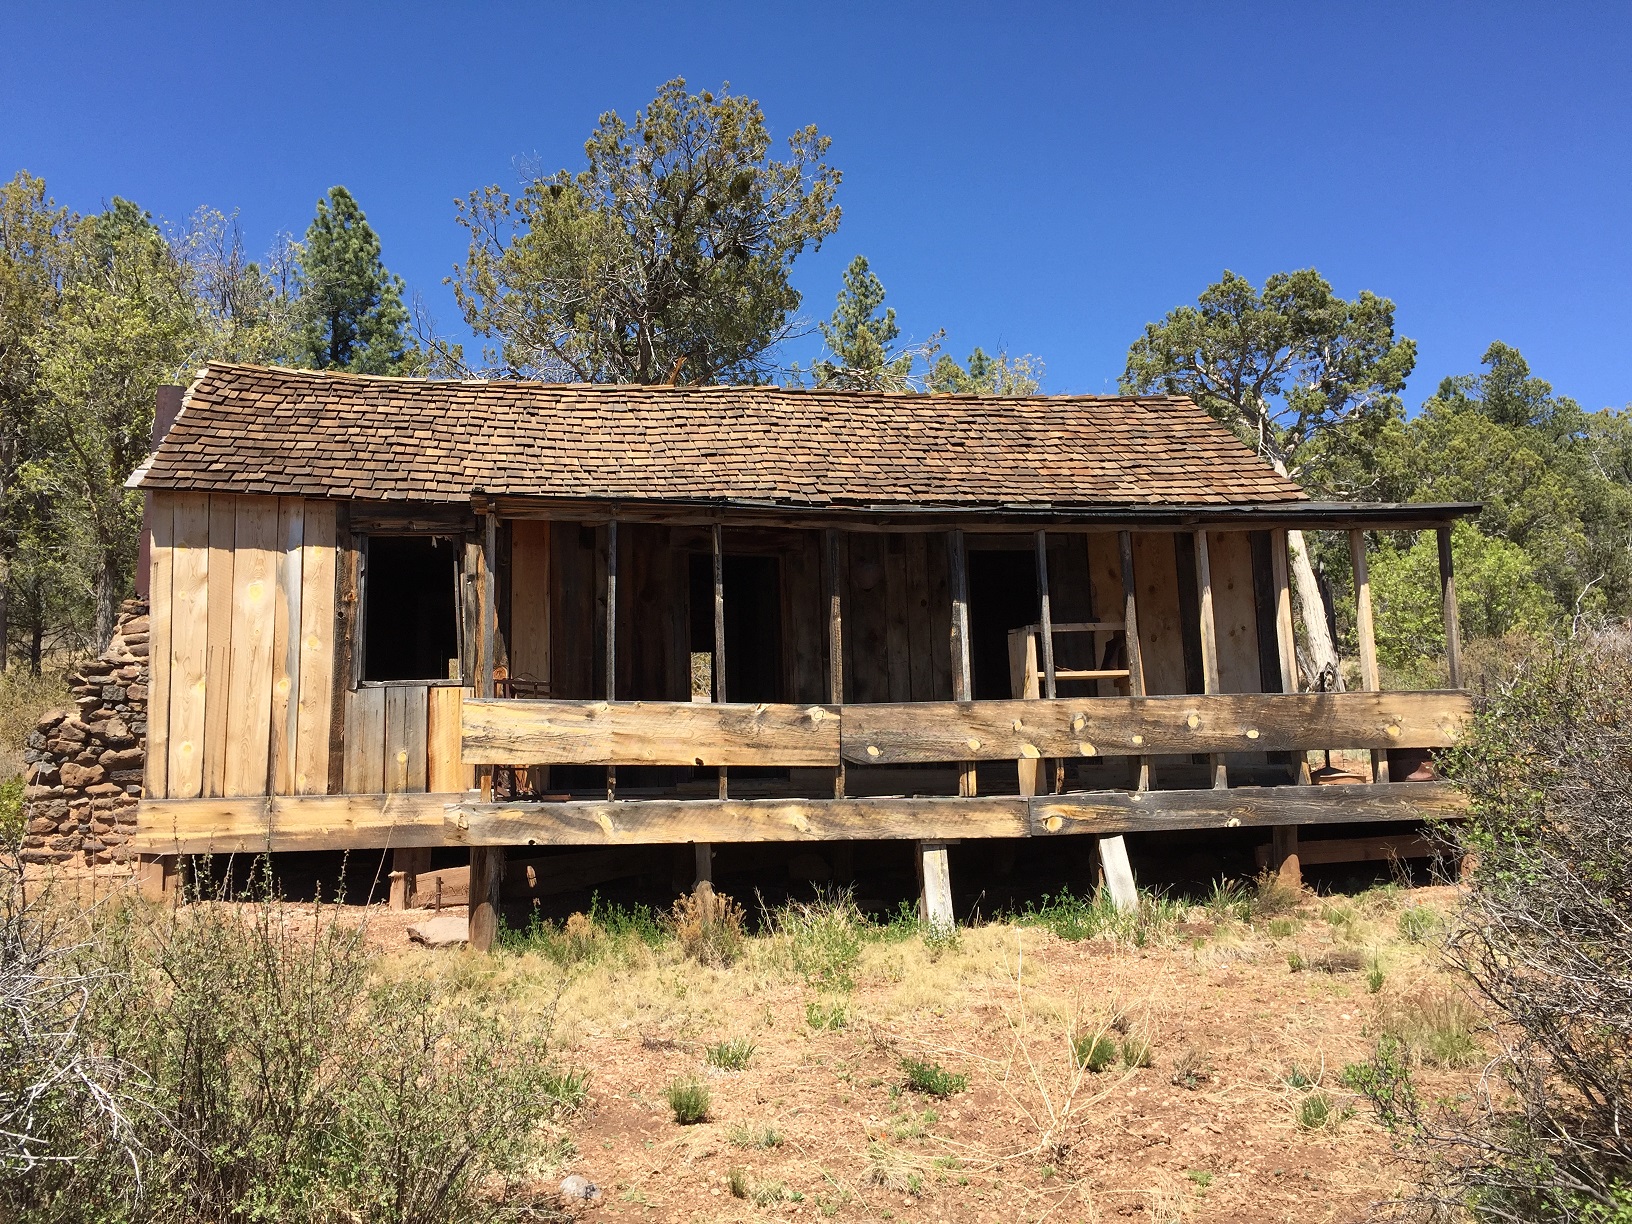 The front of the Pine Cabin on the Arizona Strip